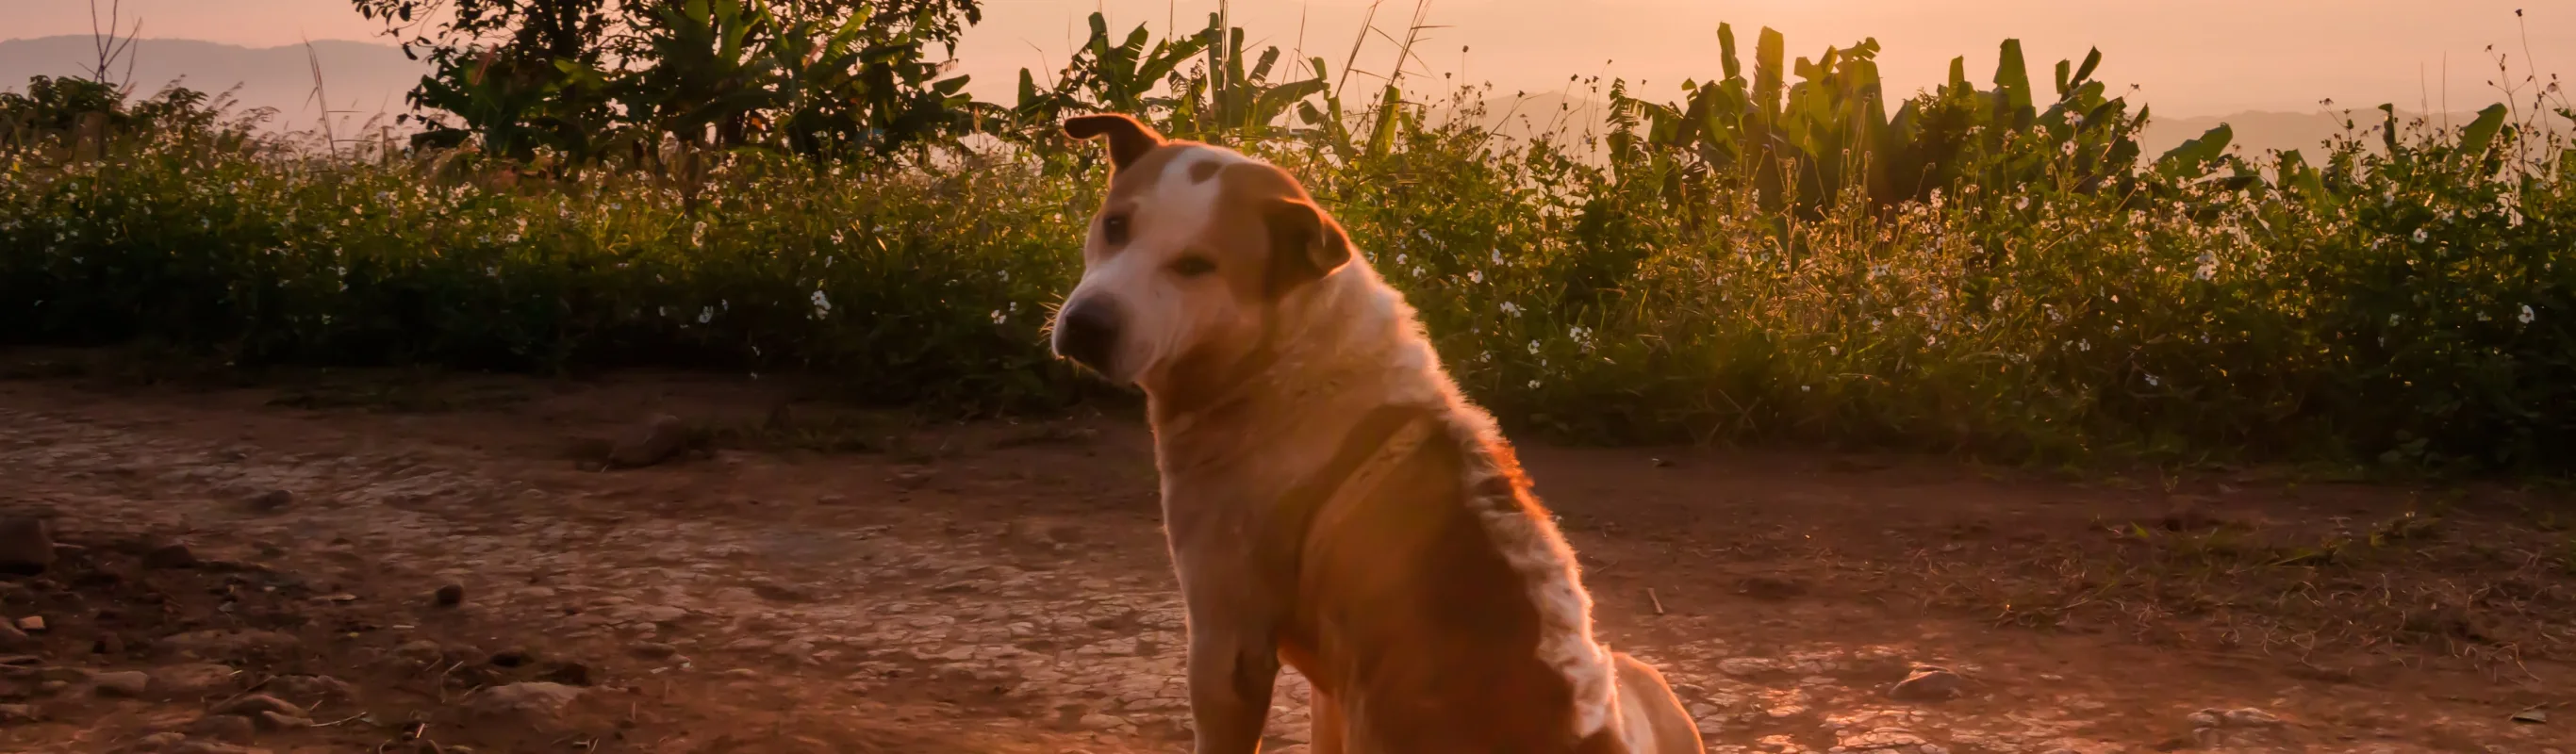 Dog looking behind him with sunset in background